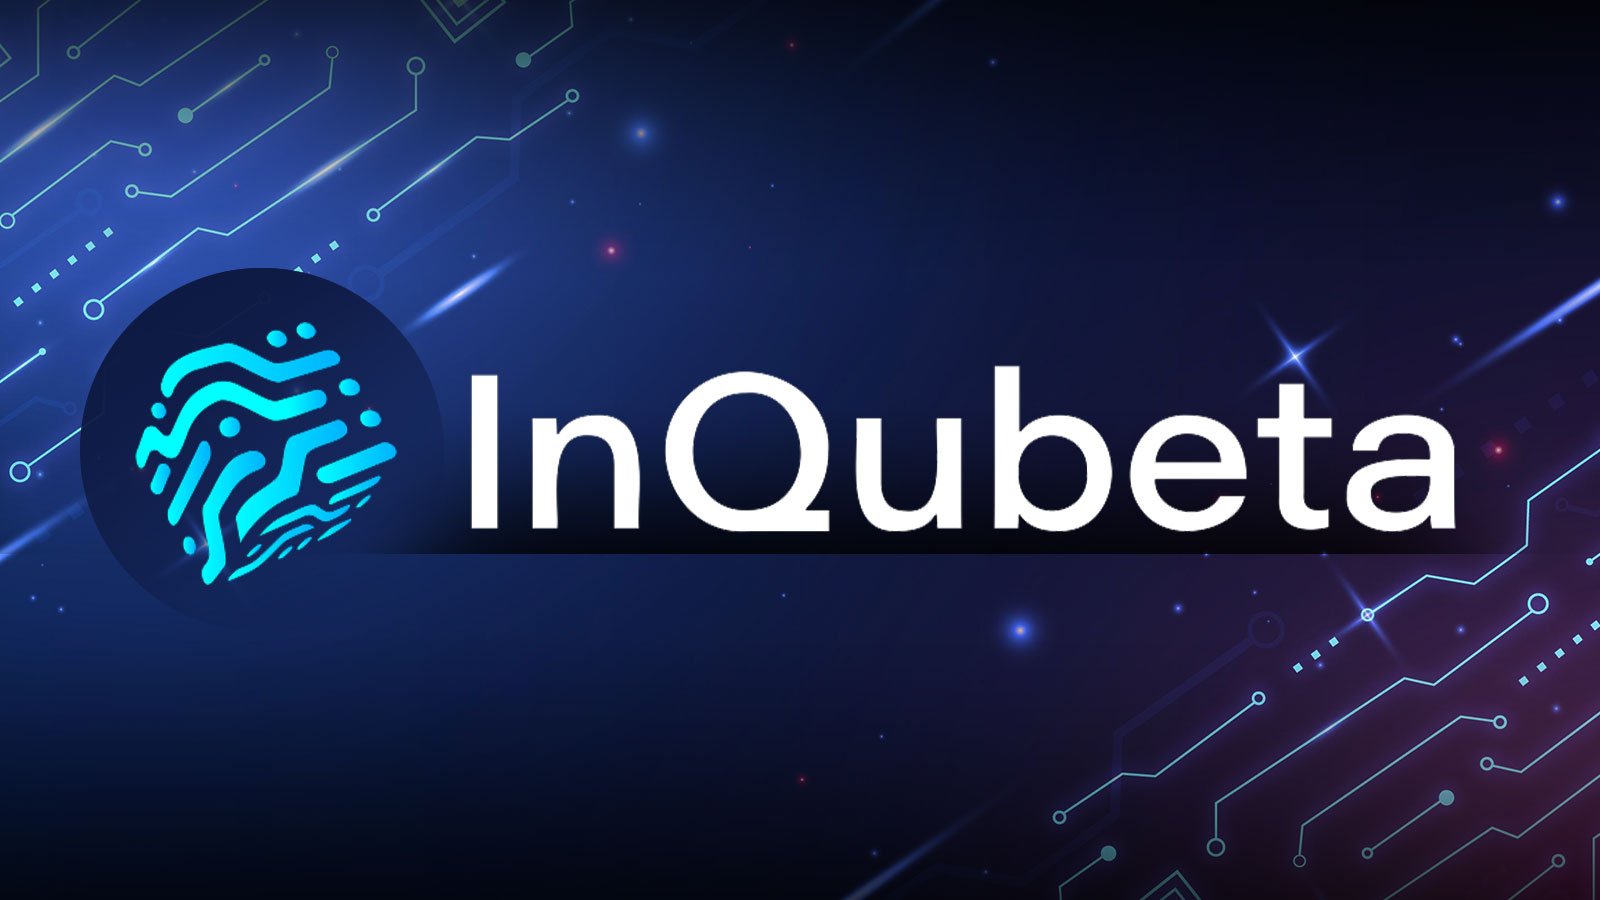 InQubeta (QUBE) Token Sale On-Boards Purchasers in January while Bitcoin (BTC) and Beam (BEAM) Might be Preparing for Run